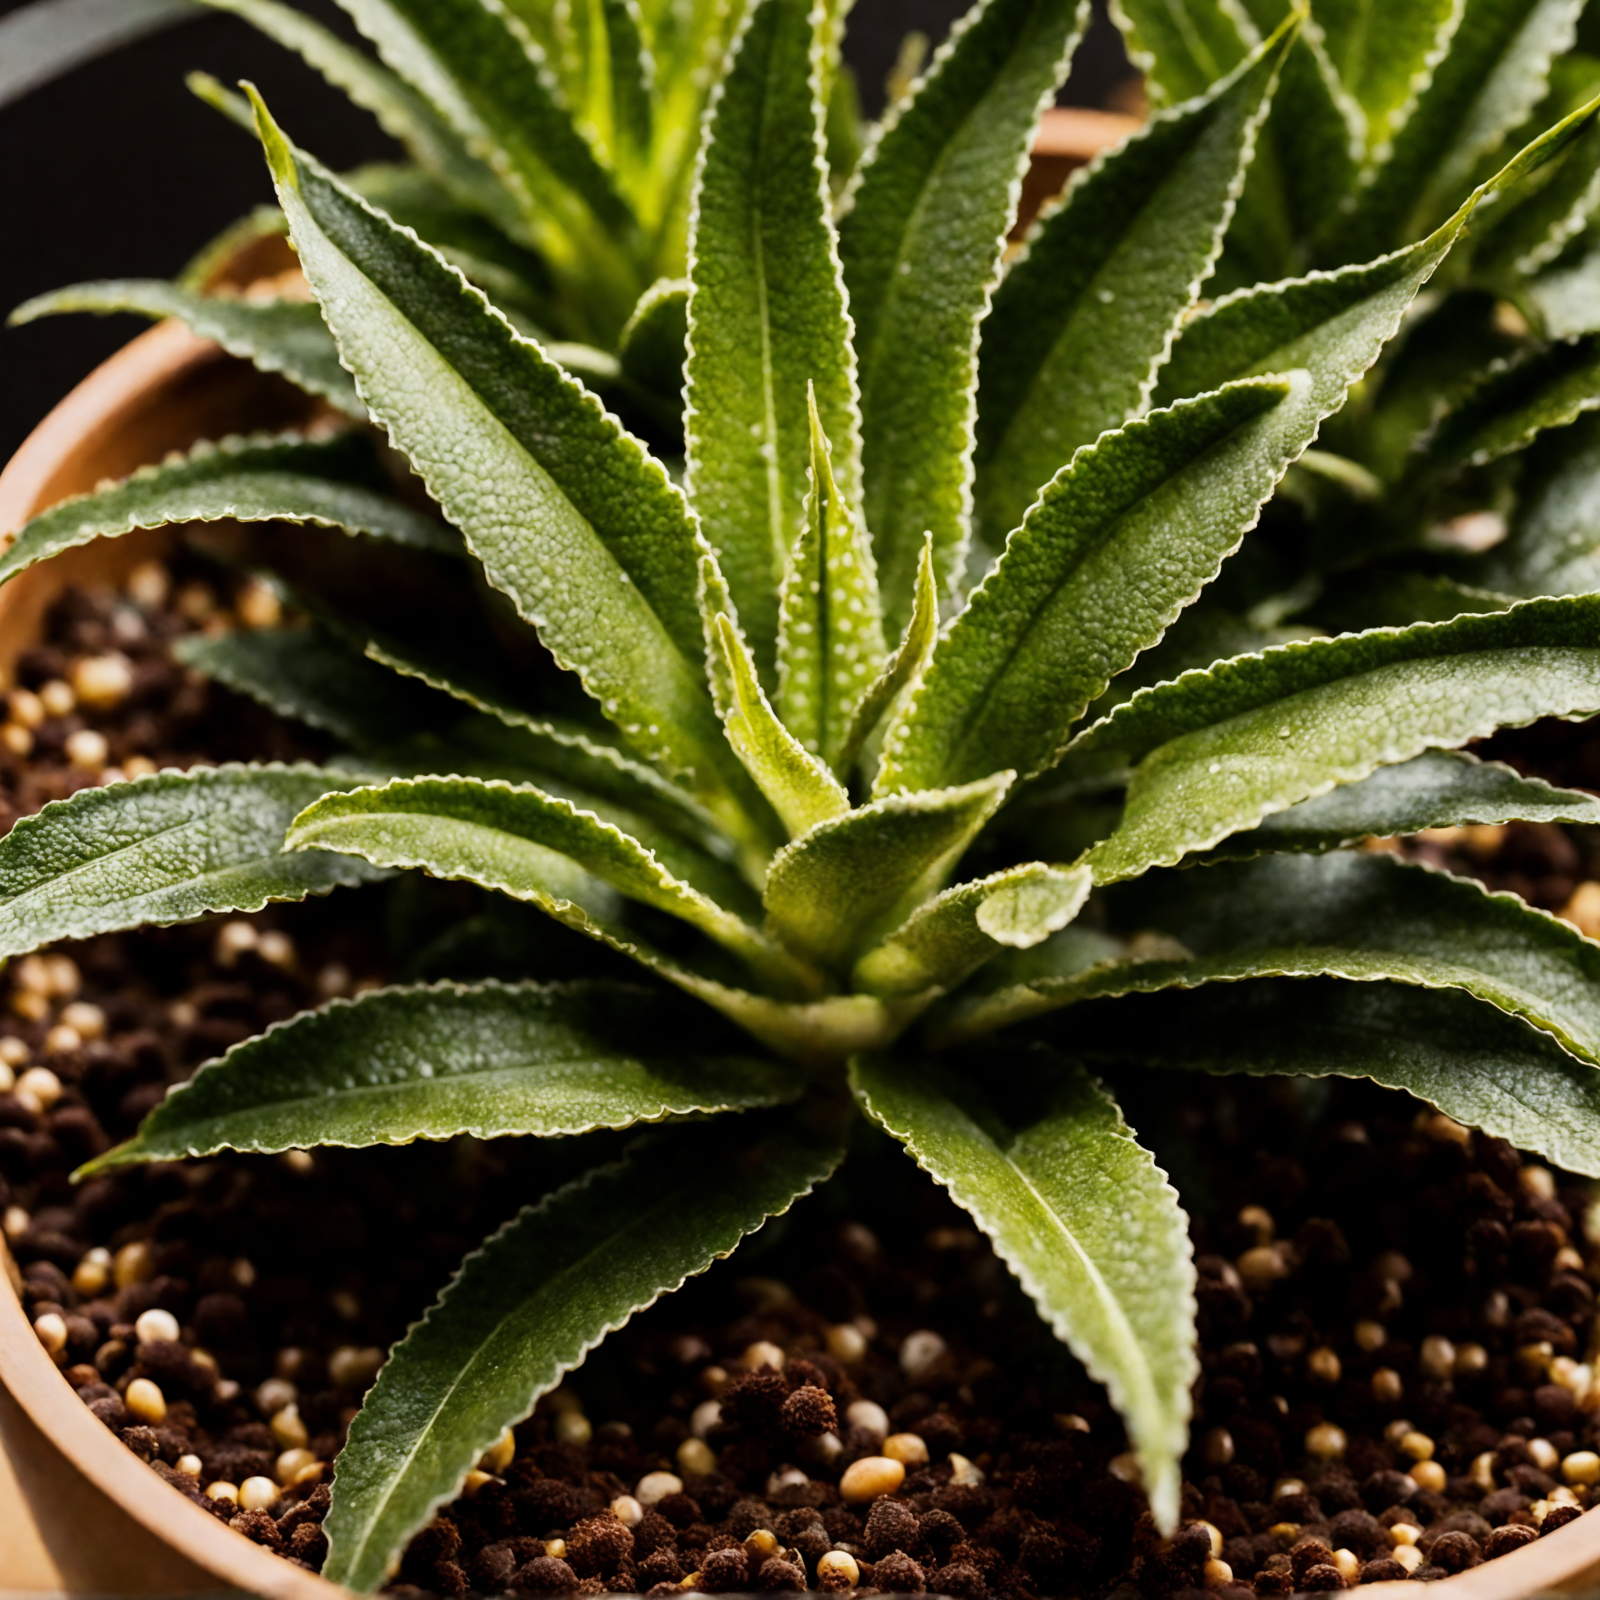 Haworthiopsis attenuata, a succulent with pointed leaves, in a bowl planter against a dark background.